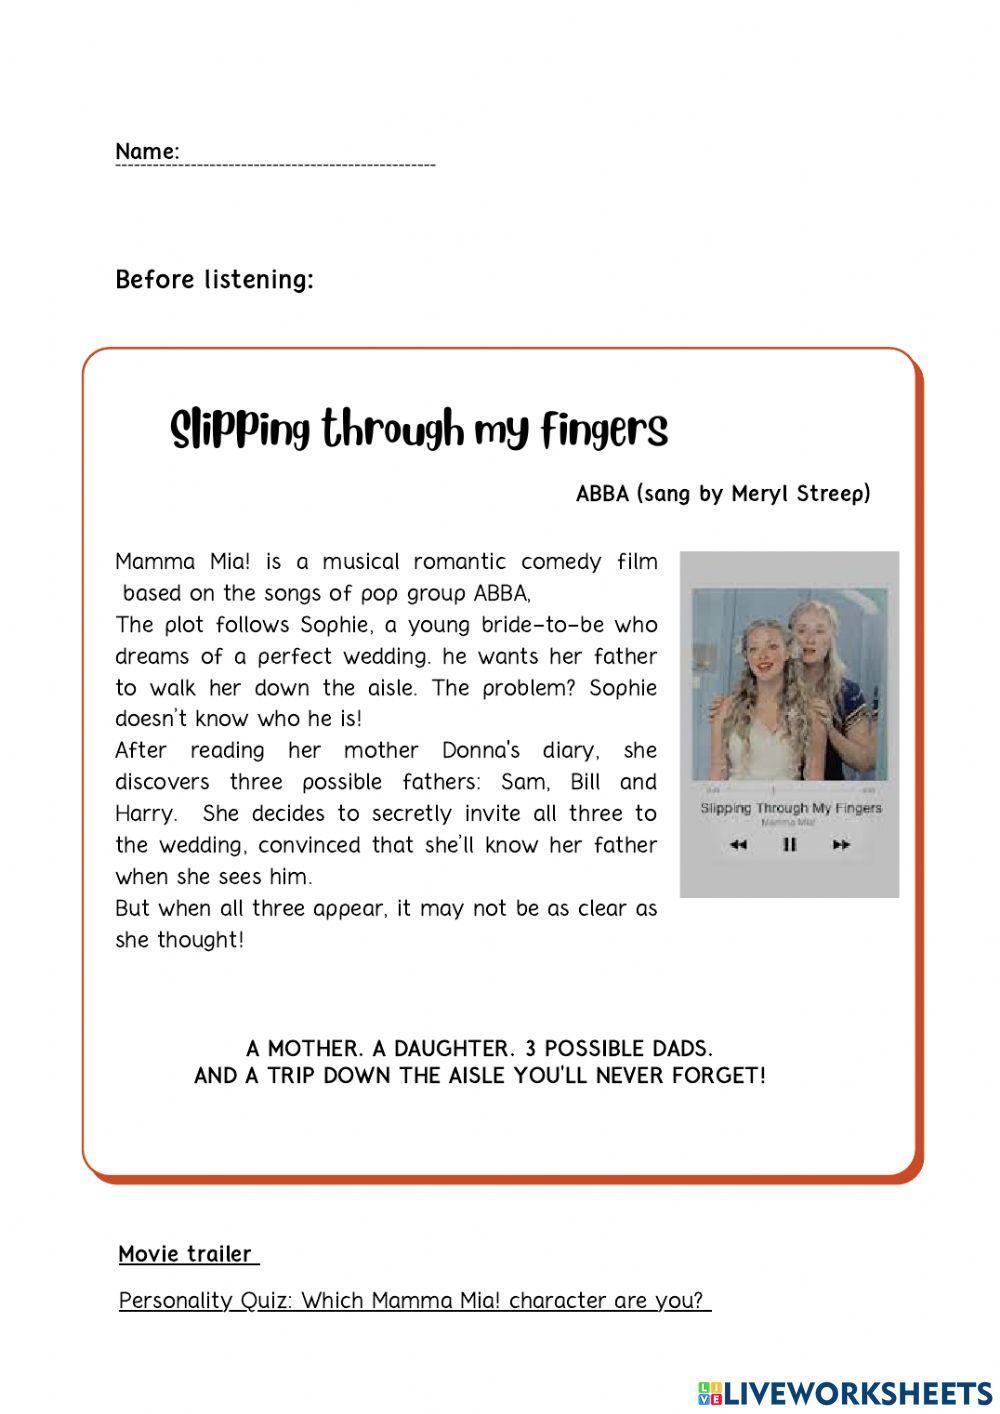 Slipping through my fingers - Song (ABBA) worksheet | Live Worksheets